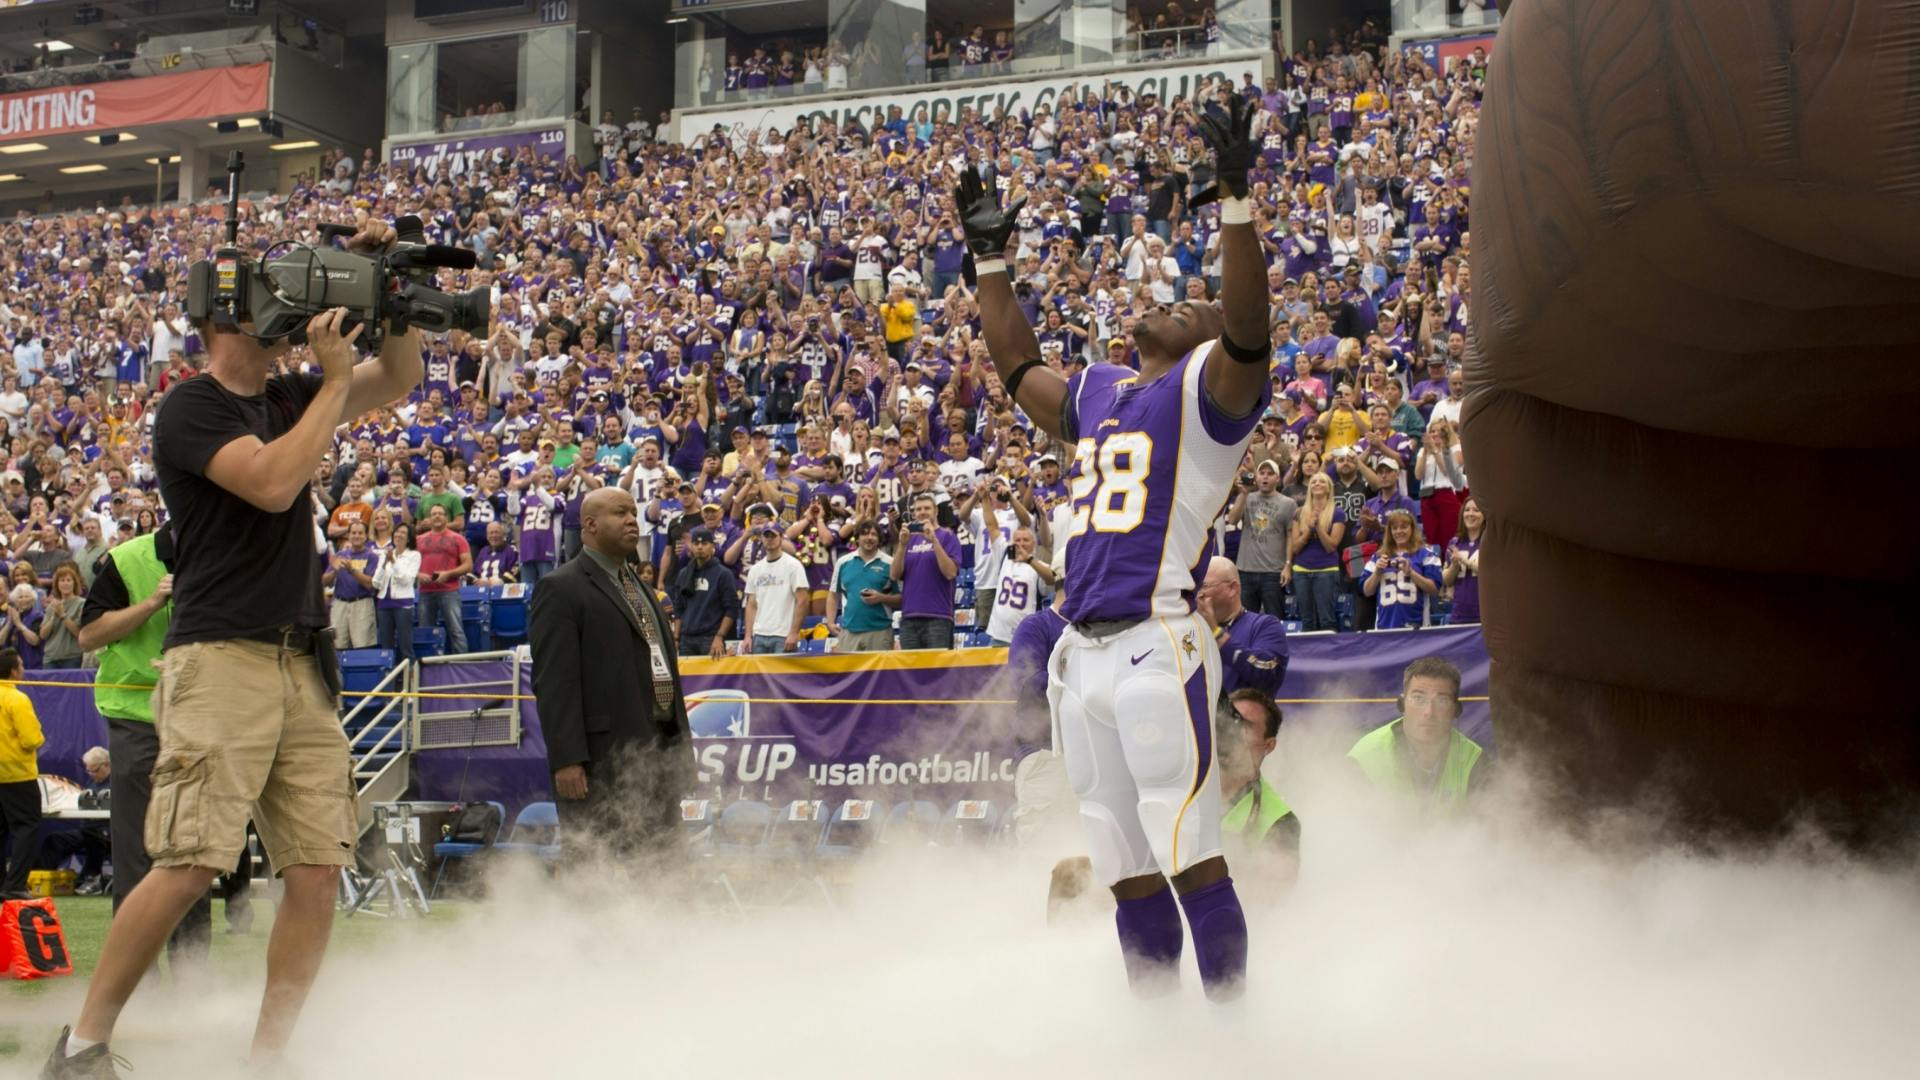 Vikings running back Adrian Peterson returned to the field for a two-touchdown performance against the Jacksonville Jaguars in the first game of the season. The Vikings won 26-23 in overtime.